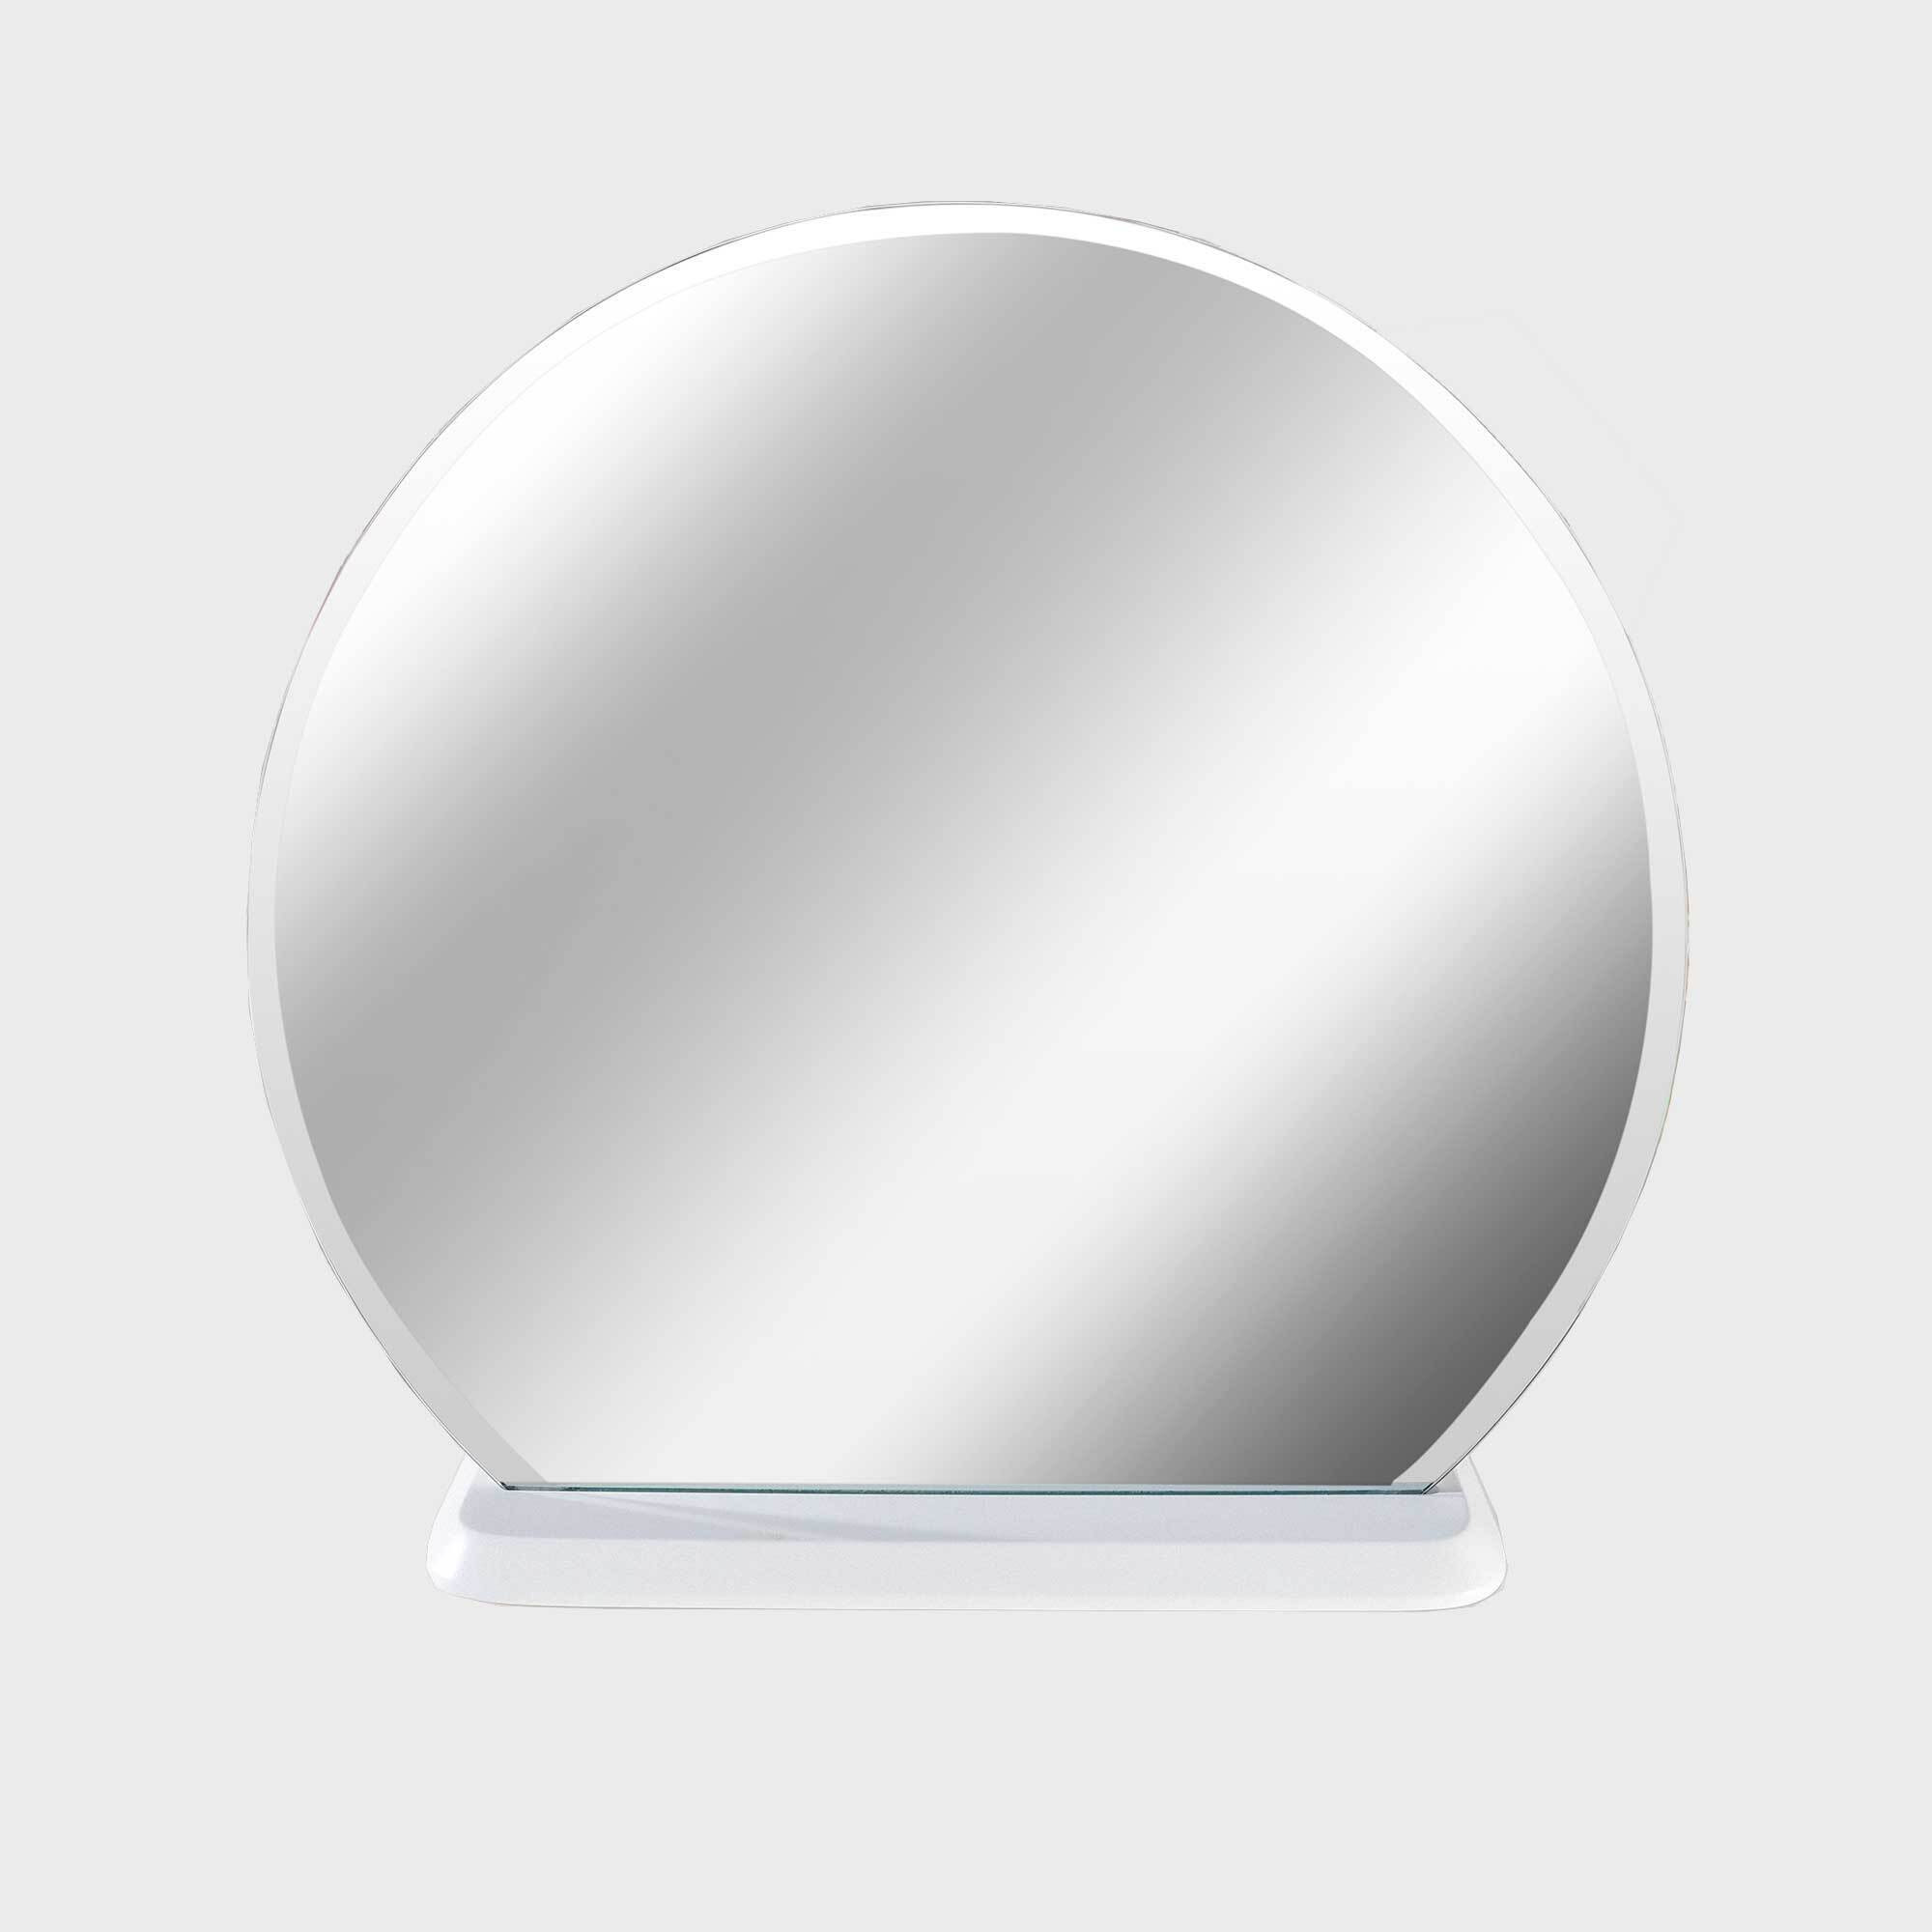 Springwell Mirror, Round, White Wood - Barker & Stonehouse - image 1